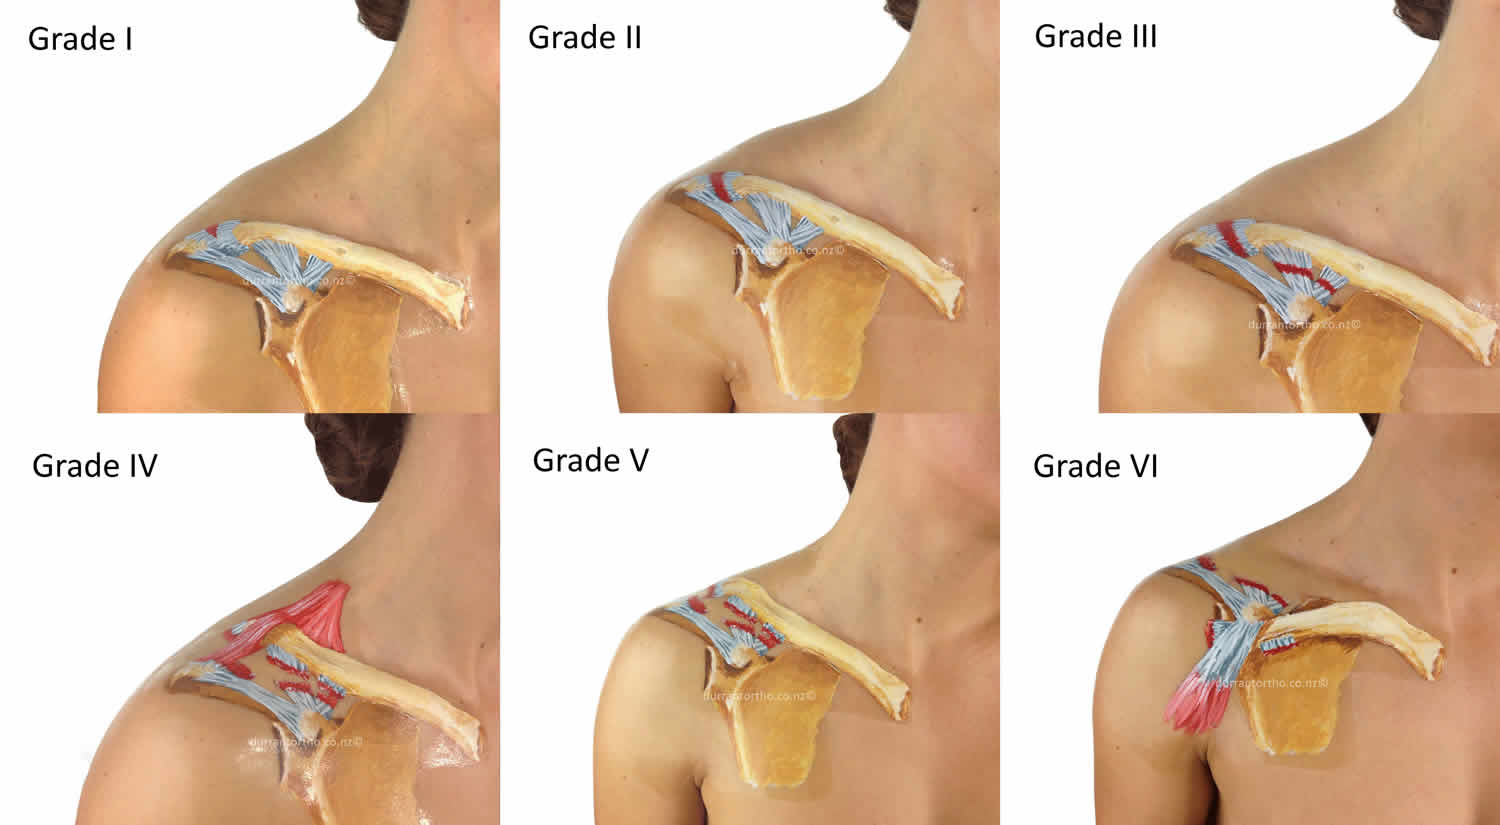 Acromioclavicular joint separation